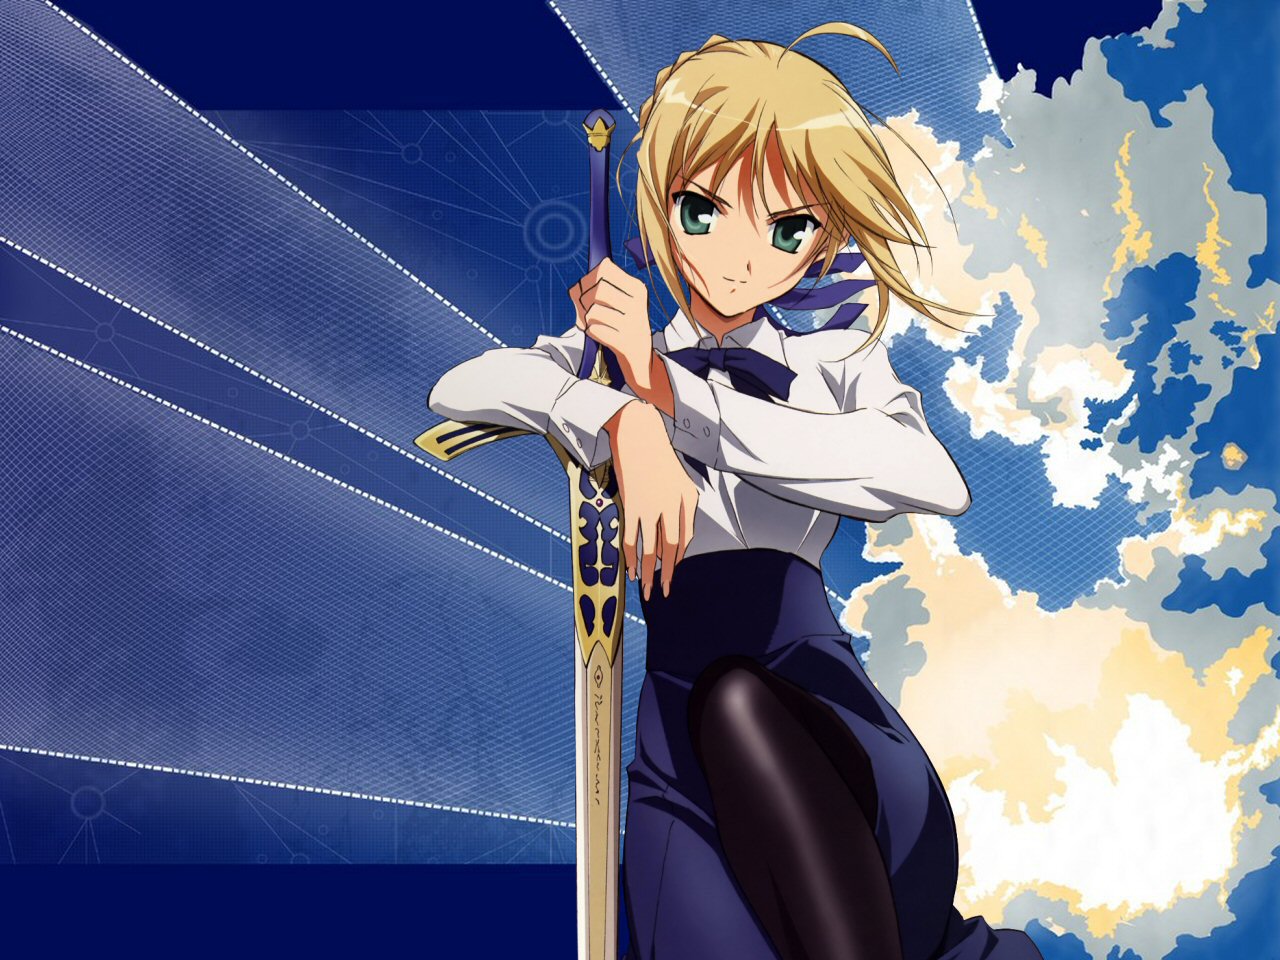 Fate Stay Night images Saber HD wallpaper and background photos